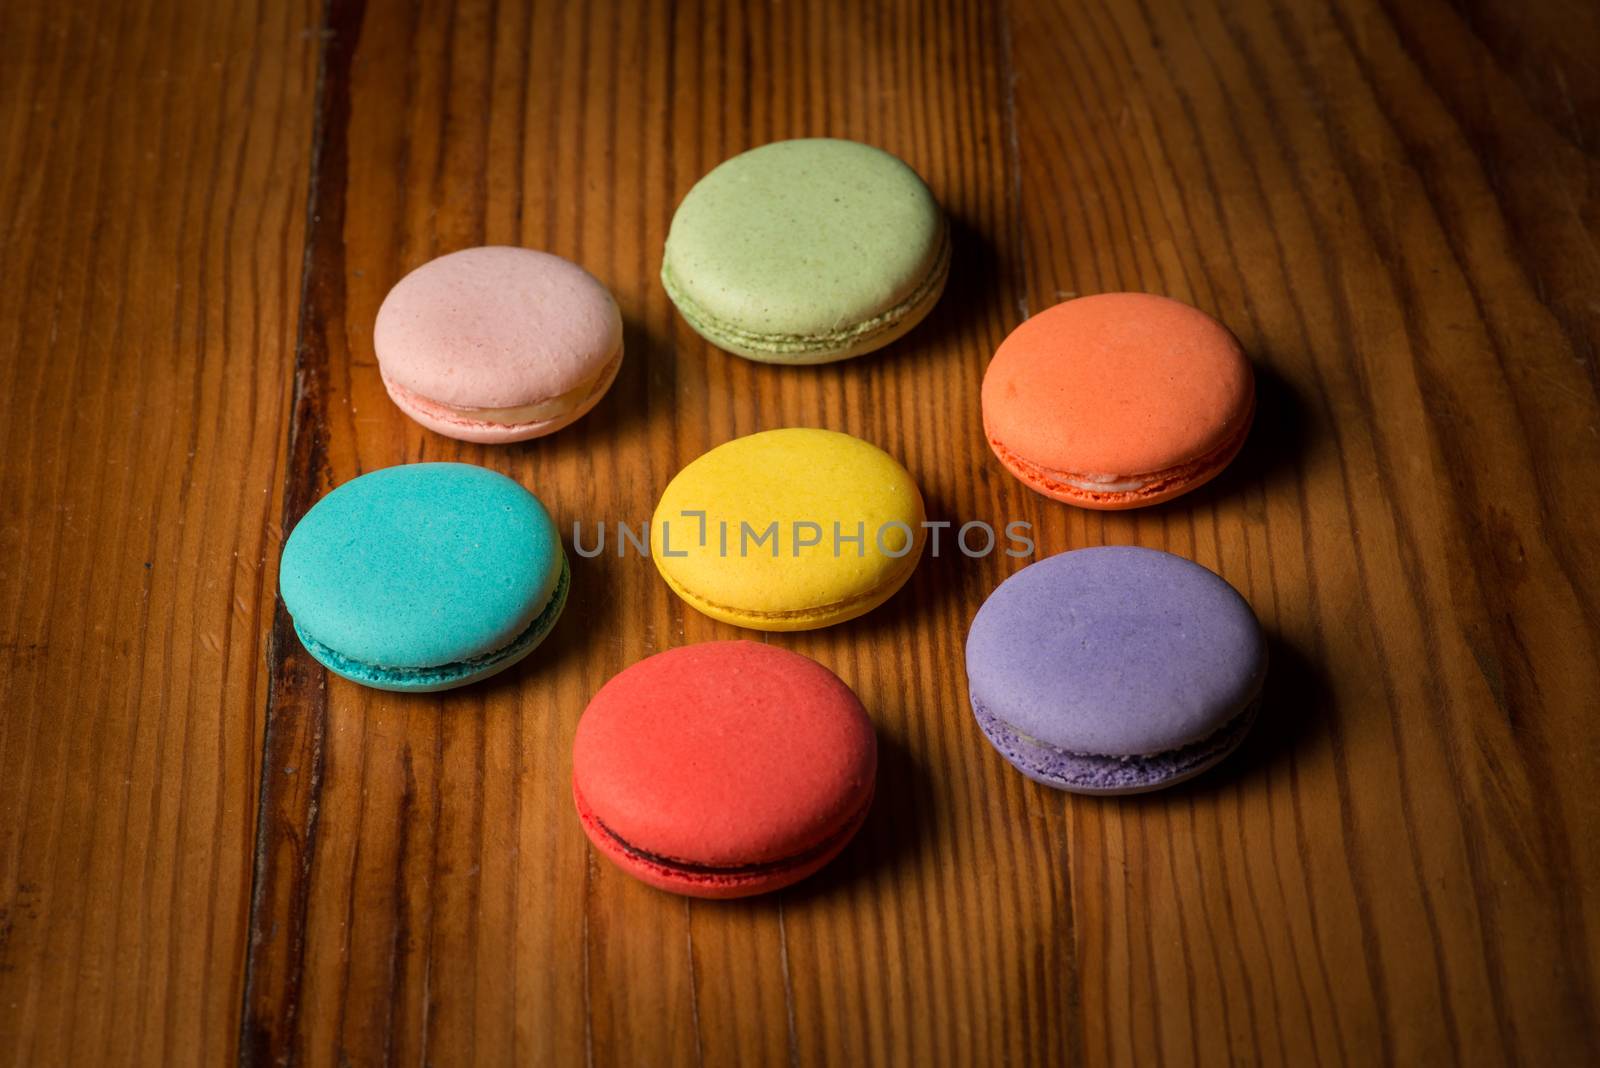 A assorted variety of colorful macaroons on wood